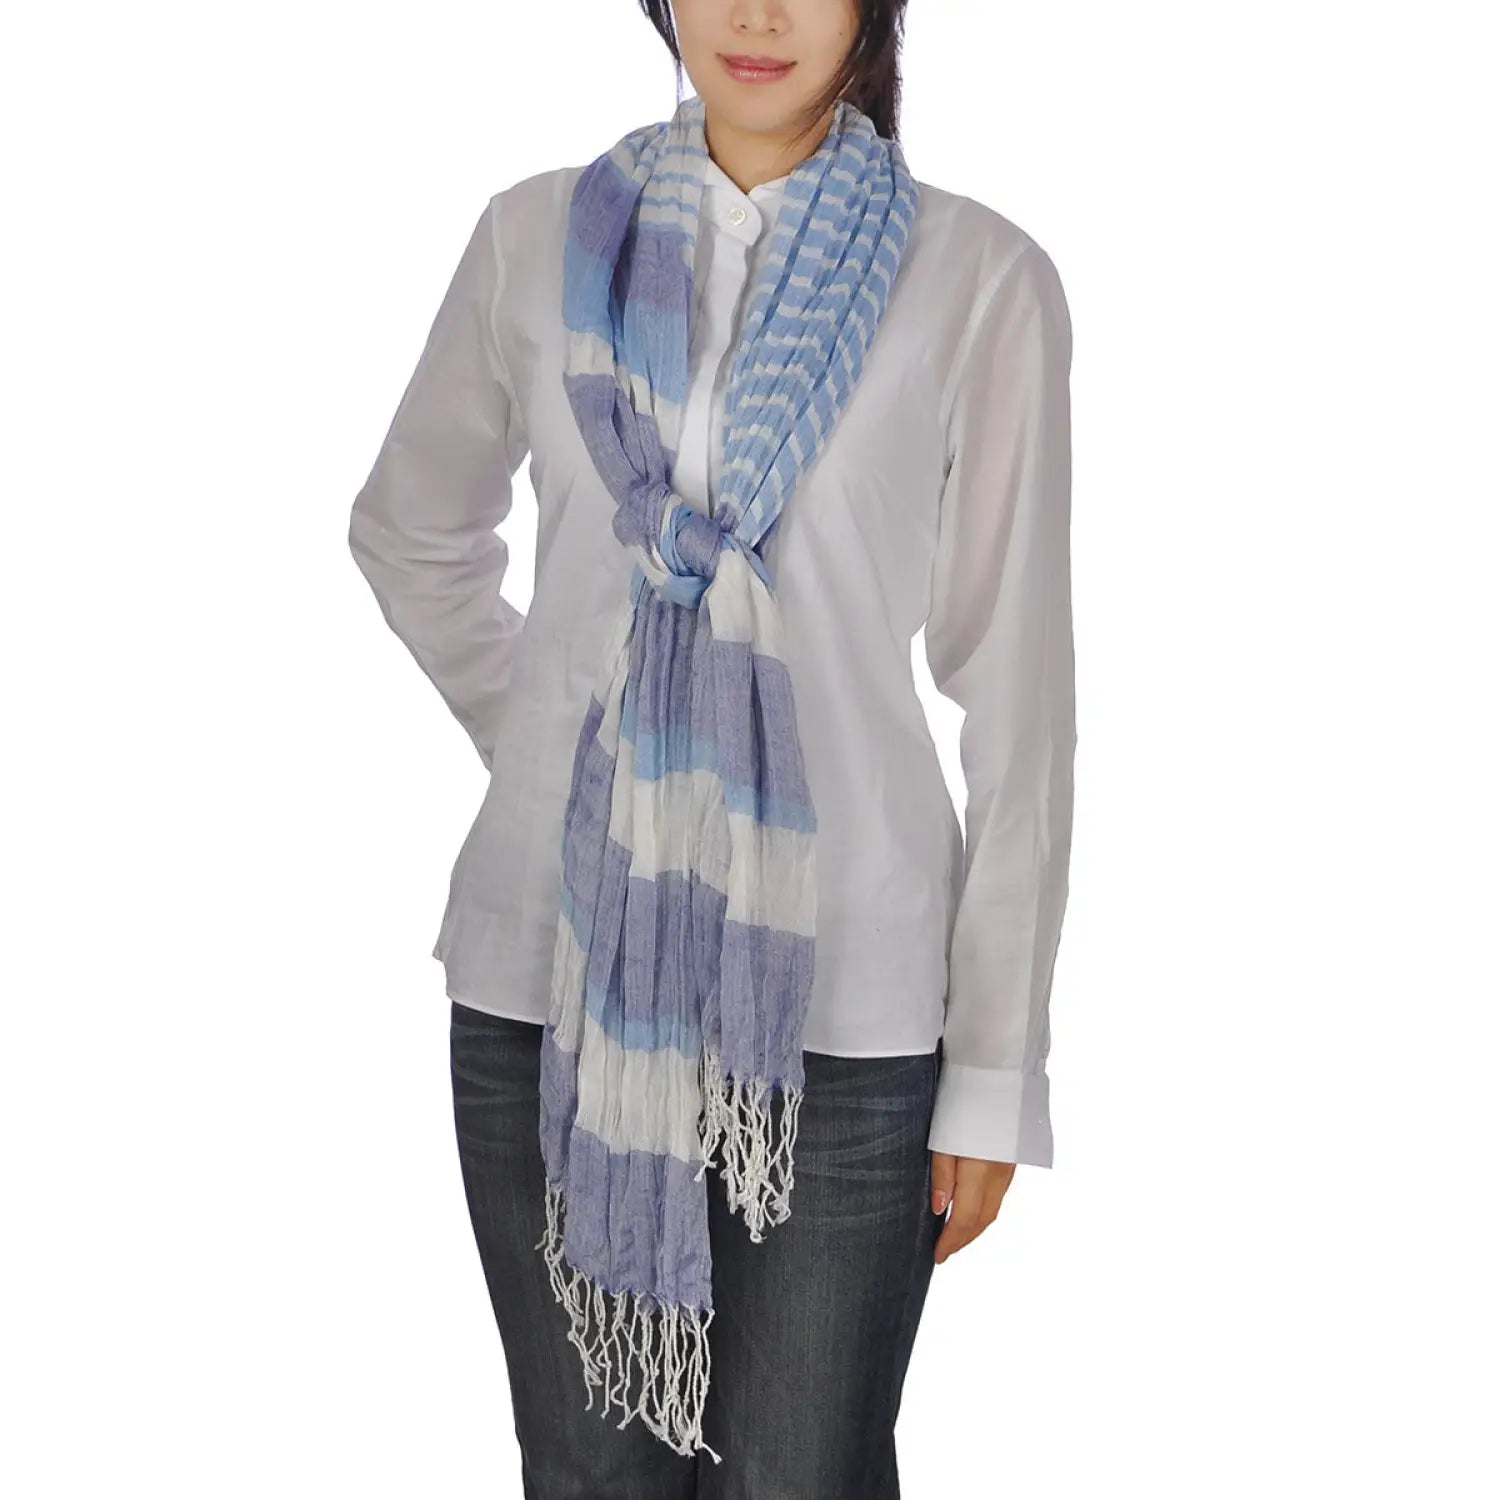 Woman wearing blue and white bold striped crinkled scarf with tassels